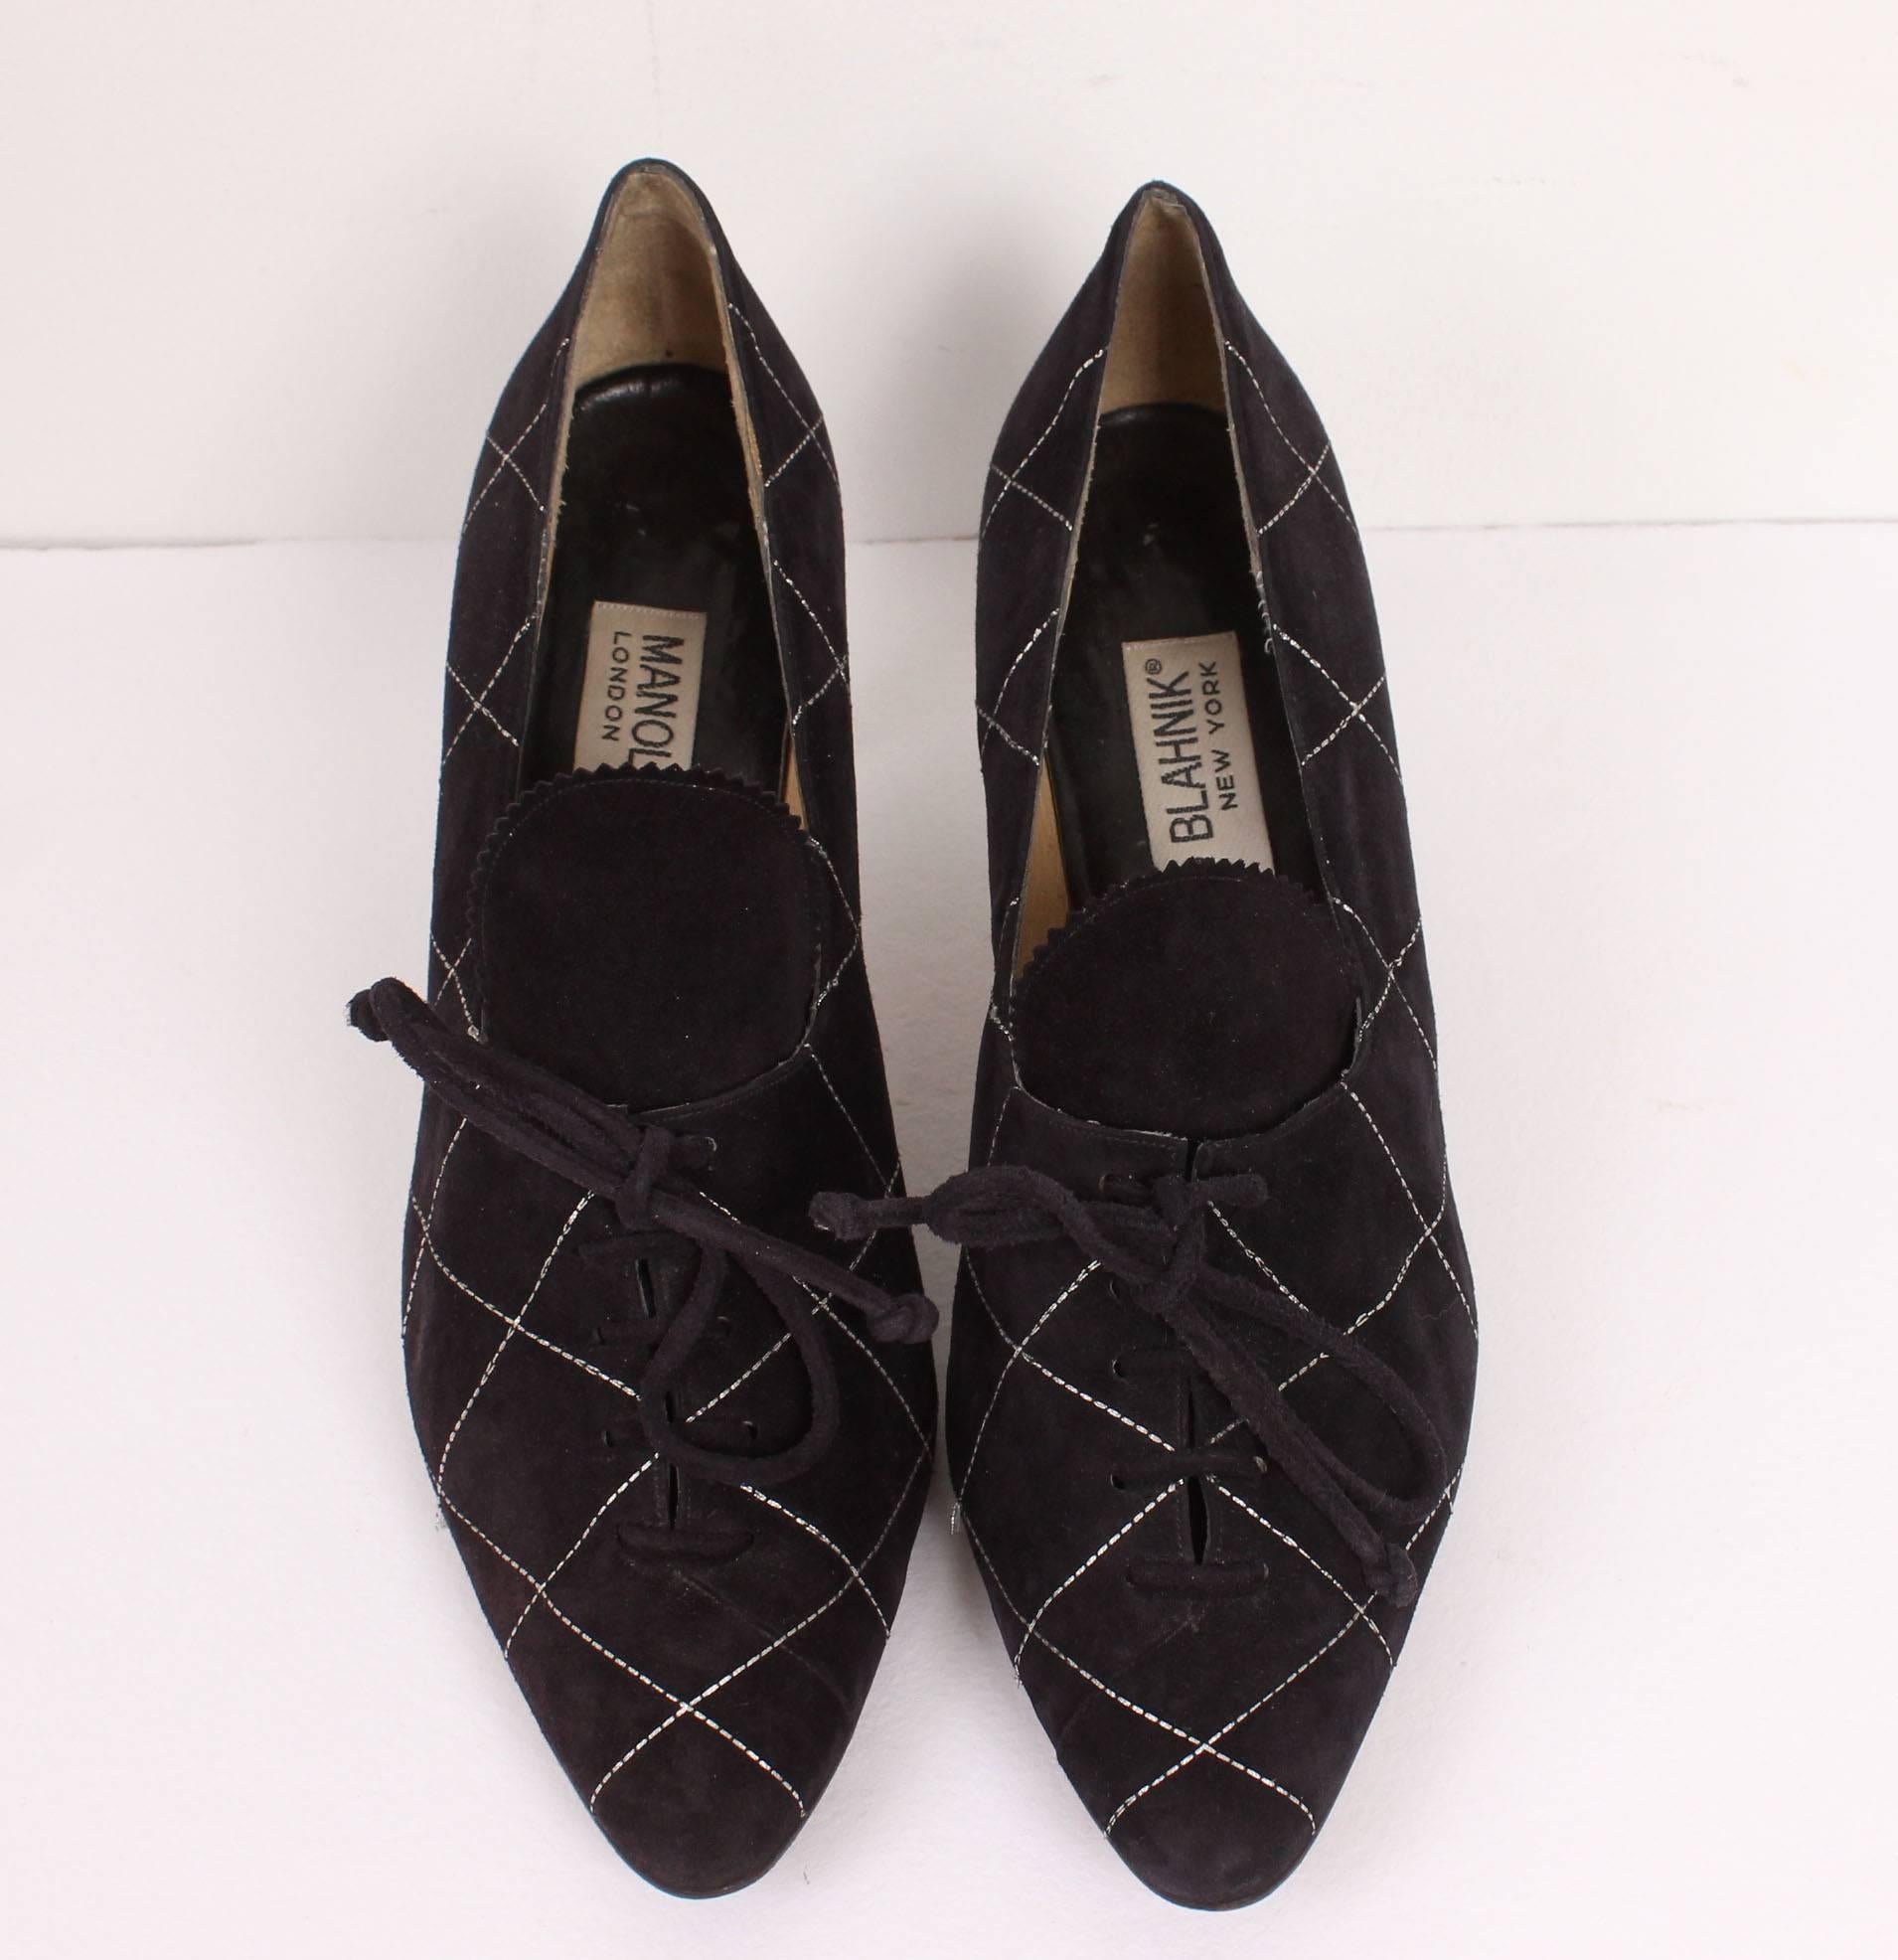 These outstanding shoes date from Manolo Blahnik's early days in New York City, from his first shop on Madison Ave. The design is smart and timeless. These suede heels lace up the front and have an elongated tongue as well as criss cross design of